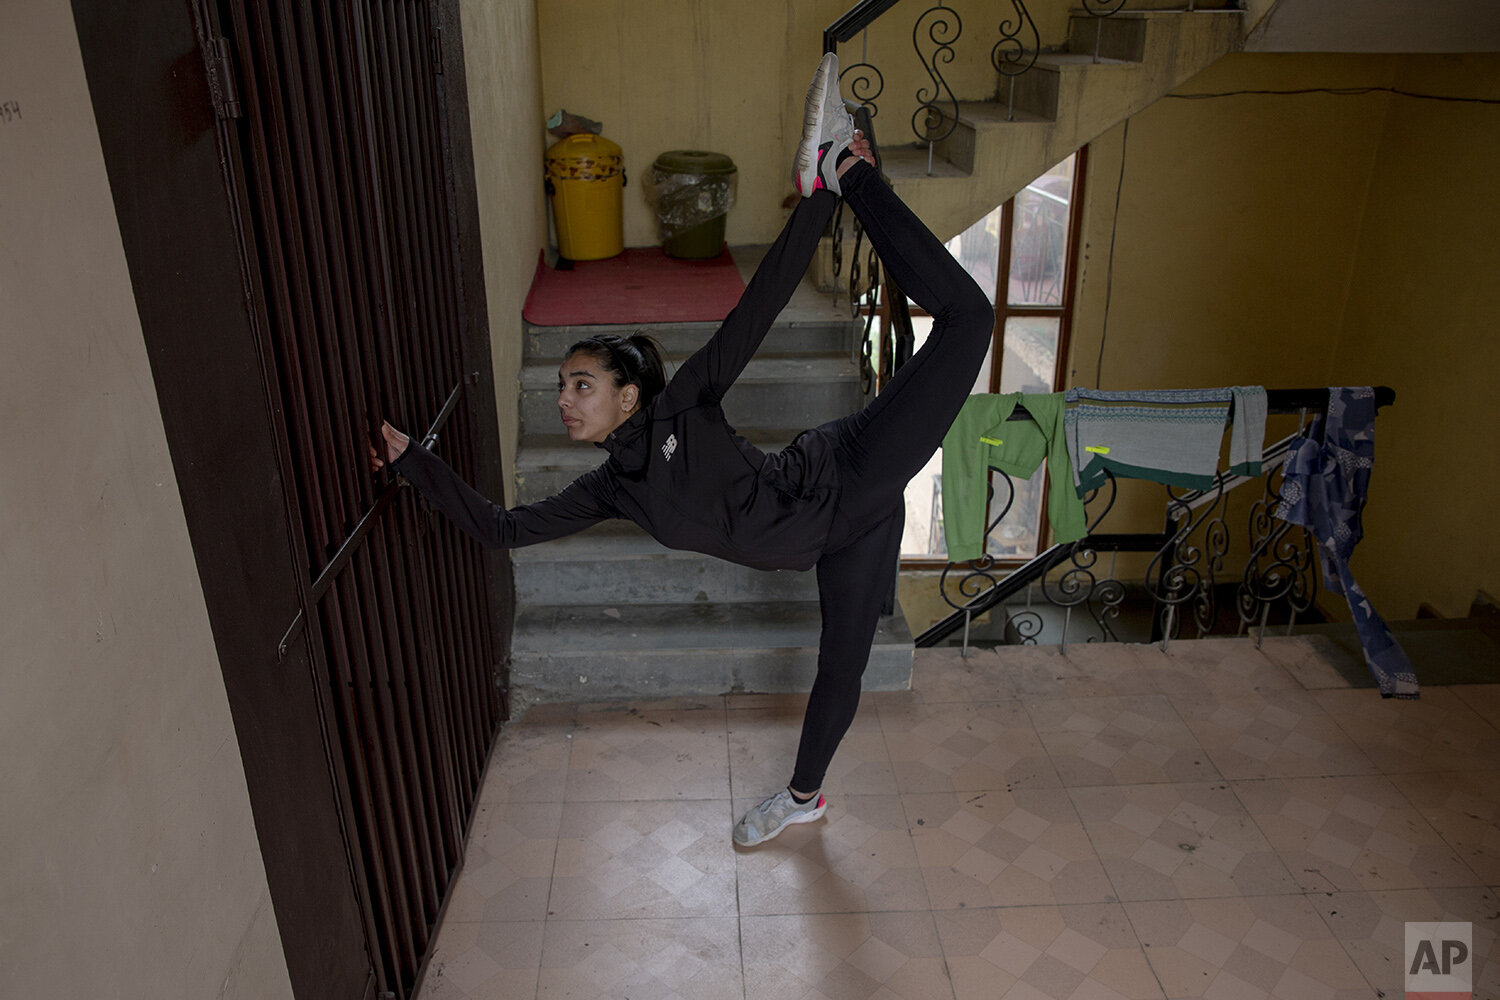  Kashmiri Taekwondoin Afreen Hyder practices in her apartment's corridor in Srinagar, Indian controlled Kashmir, April 19, 2020. The 20-year-old martial arts player shares a two-bedroom apartment with her parents in the region’s main city of Srinagar